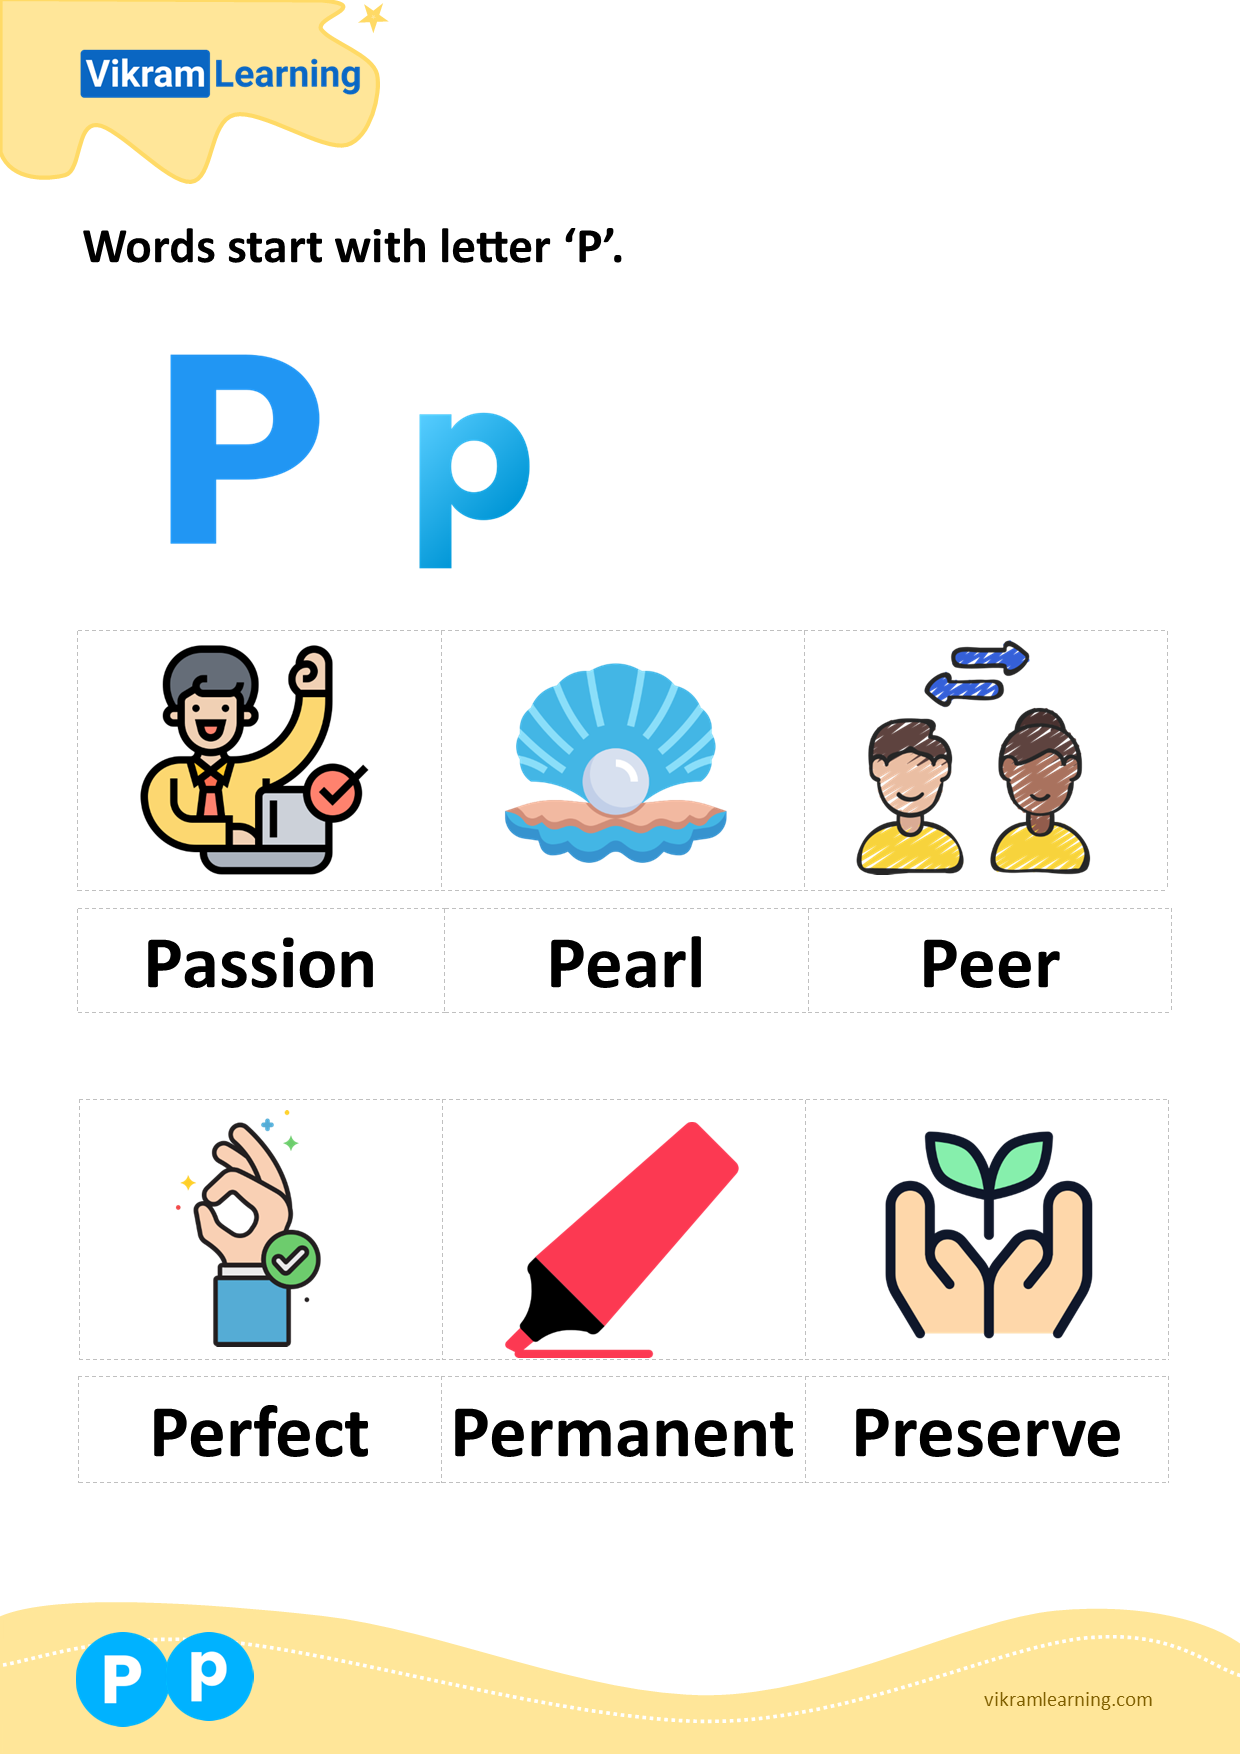 Download words start with letter 'p' worksheets